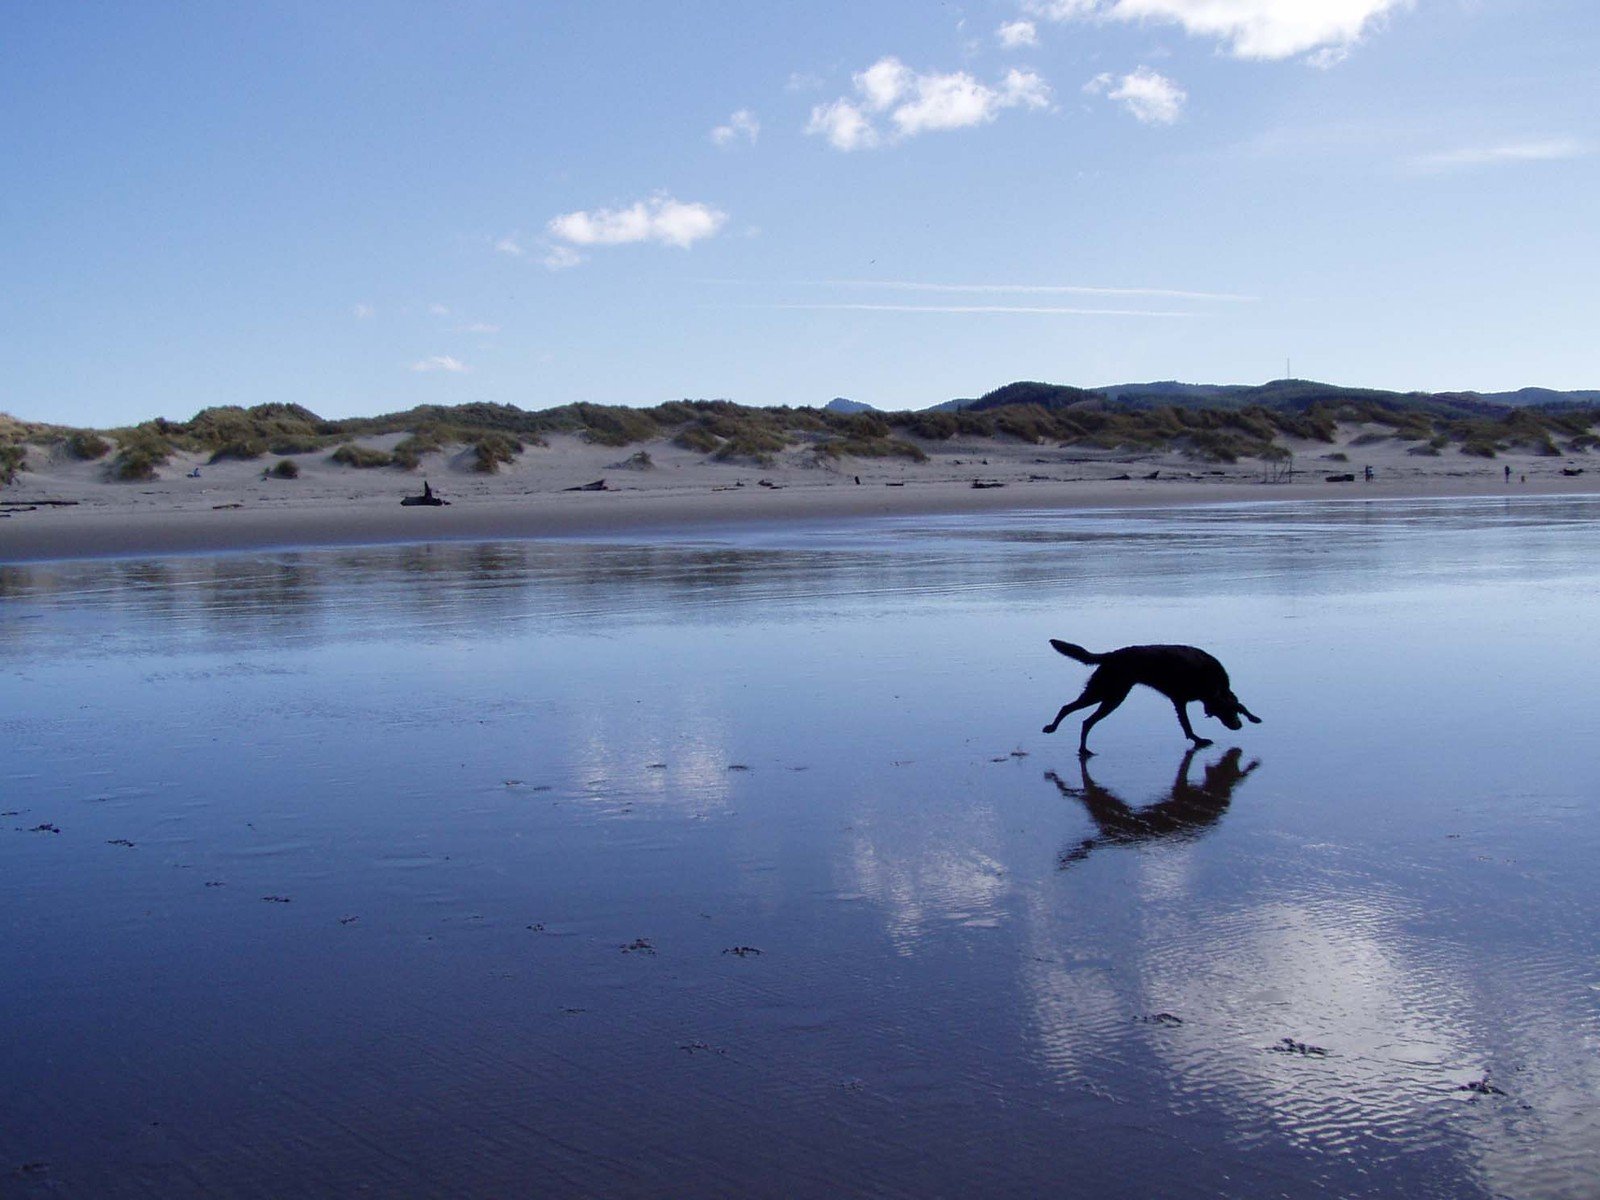 a black dog is in the shallow water of a beach